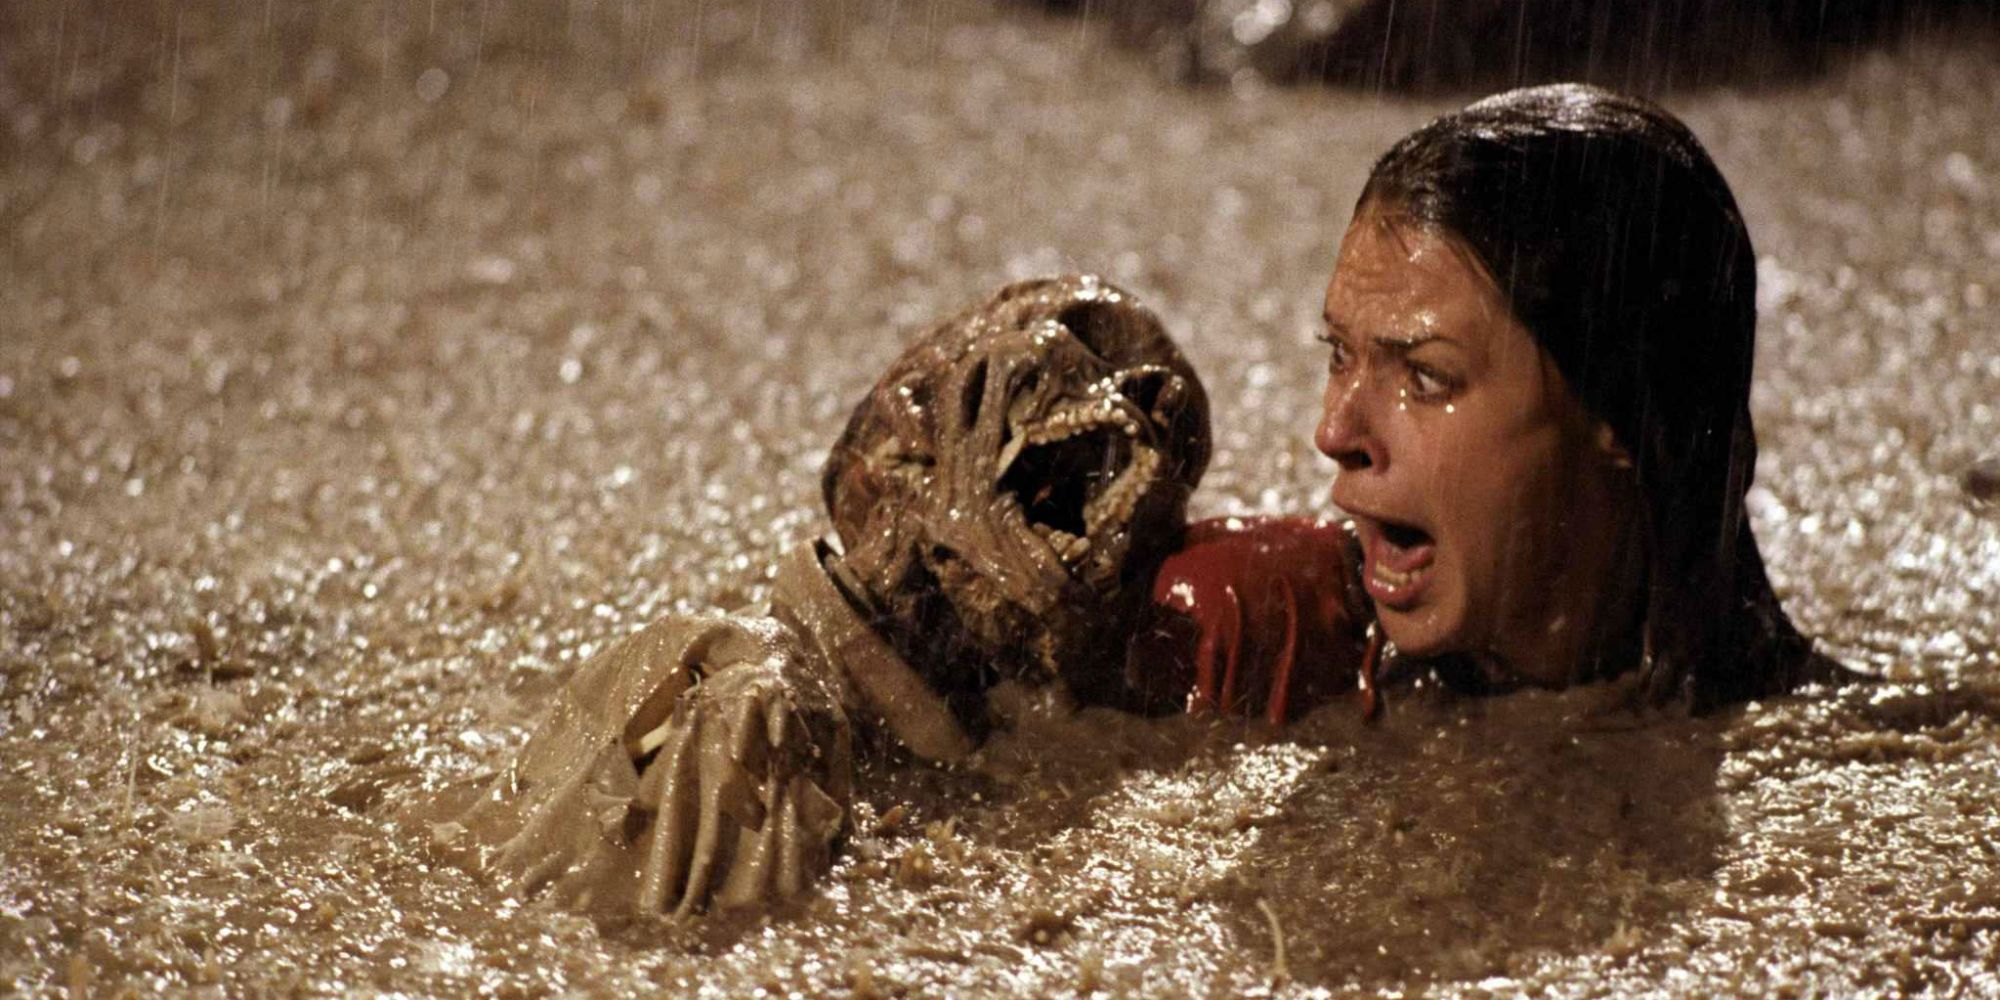 Diane Freeling screams at a skeleton in a pool in Poltergeist.